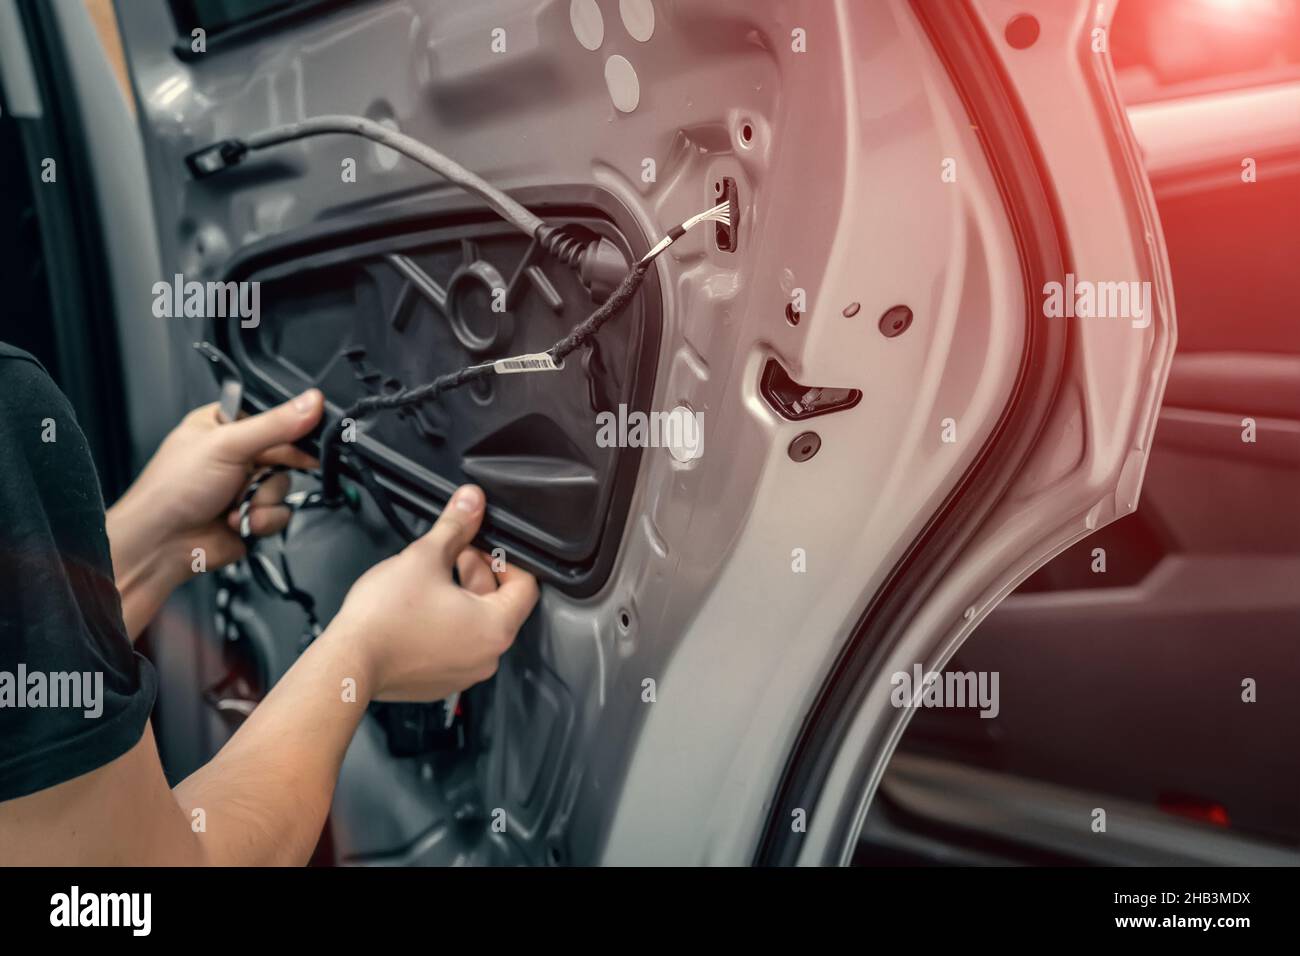 Auto service worker disassembles car door for repair close up. Stock Photo